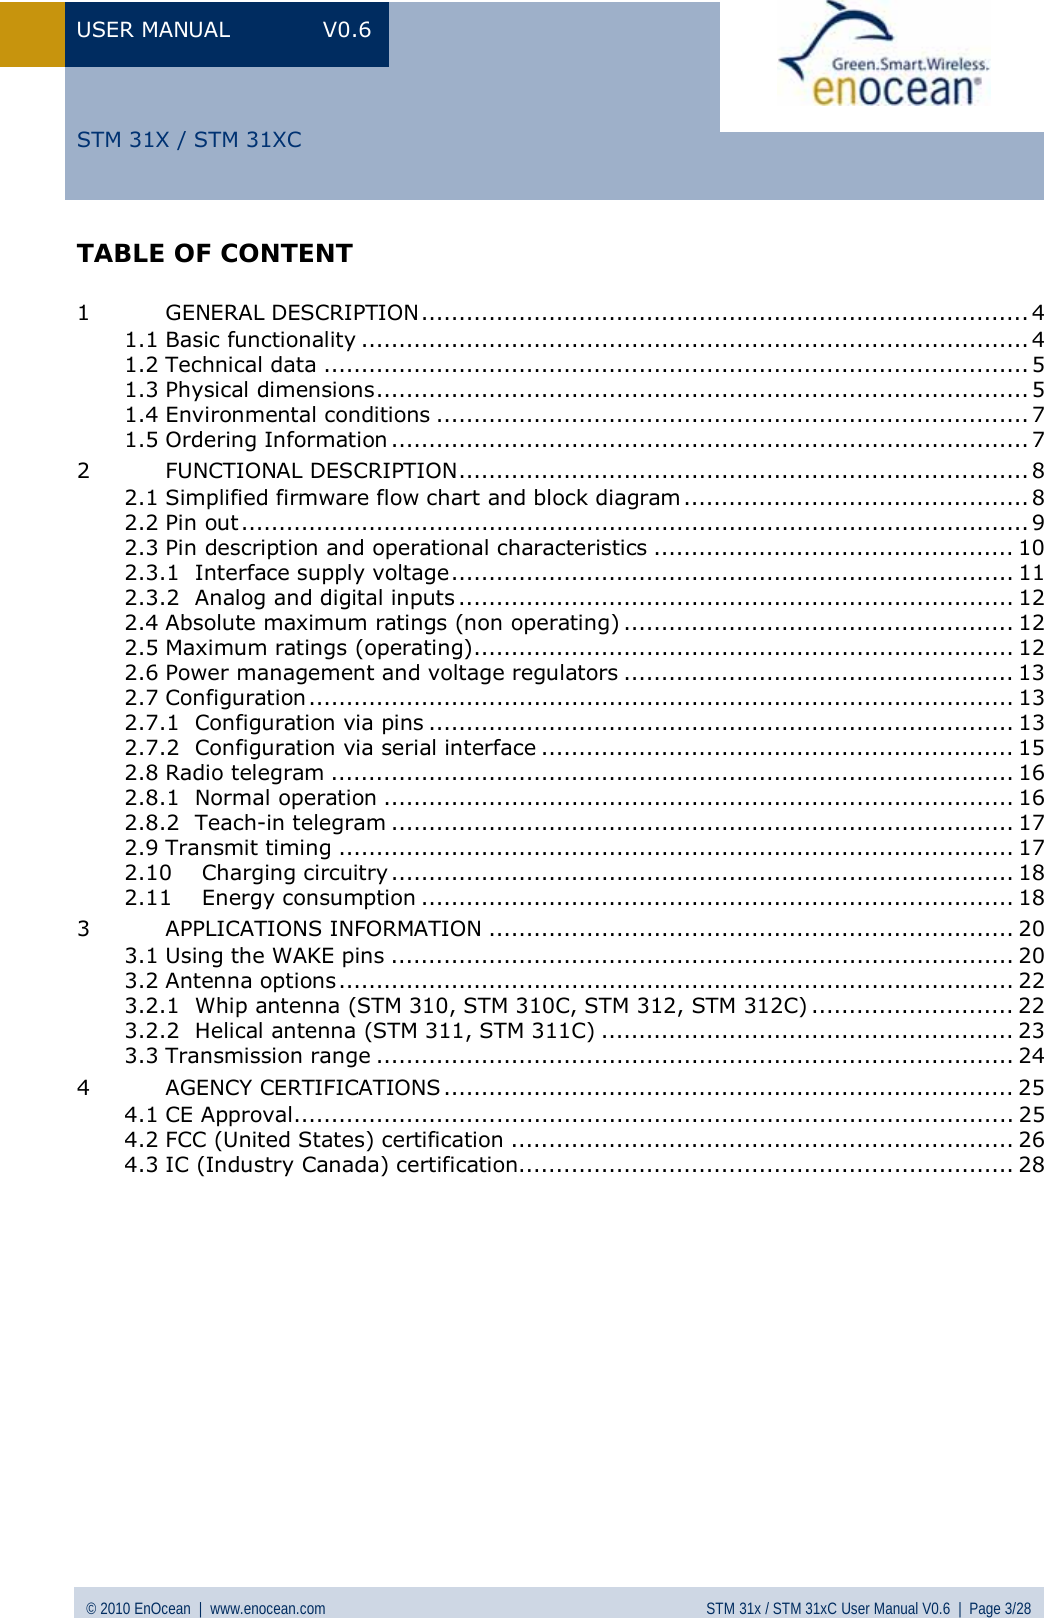 USER MANUAL V0.6 © 2010 EnOcean  |  www.enocean.com STM 31x / STM 31xC User Manual V0.6  |  Page 3/28  STM 31X / STM 31XCTABLE OF CONTENT  1 GENERAL DESCRIPTION................................................................................. 4 1.1 Basic functionality ......................................................................................... 4 1.2 Technical data .............................................................................................. 5 1.3 Physical dimensions....................................................................................... 5 1.4 Environmental conditions ............................................................................... 7 1.5 Ordering Information ..................................................................................... 7 2 FUNCTIONAL DESCRIPTION............................................................................ 8 2.1 Simplified firmware flow chart and block diagram.............................................. 8 2.2 Pin out ......................................................................................................... 9 2.3 Pin description and operational characteristics ................................................ 10 2.3.1 Interface supply voltage........................................................................... 11 2.3.2 Analog and digital inputs .......................................................................... 12 2.4 Absolute maximum ratings (non operating) .................................................... 12 2.5 Maximum ratings (operating)........................................................................ 12 2.6 Power management and voltage regulators .................................................... 13 2.7 Configuration.............................................................................................. 13 2.7.1 Configuration via pins .............................................................................. 13 2.7.2 Configuration via serial interface ............................................................... 15 2.8 Radio telegram ........................................................................................... 16 2.8.1 Normal operation .................................................................................... 16 2.8.2 Teach-in telegram ................................................................................... 17 2.9 Transmit timing .......................................................................................... 17 2.10 Charging circuitry................................................................................... 18 2.11 Energy consumption ............................................................................... 18 3 APPLICATIONS INFORMATION ...................................................................... 20 3.1 Using the WAKE pins ................................................................................... 20 3.2 Antenna options.......................................................................................... 22 3.2.1 Whip antenna (STM 310, STM 310C, STM 312, STM 312C) ........................... 22 3.2.2 Helical antenna (STM 311, STM 311C) ....................................................... 23 3.3 Transmission range ..................................................................................... 24 4 AGENCY CERTIFICATIONS ............................................................................ 25 4.1 CE Approval................................................................................................ 25 4.2 FCC (United States) certification ................................................................... 26 4.3 IC (Industry Canada) certification.................................................................. 28  